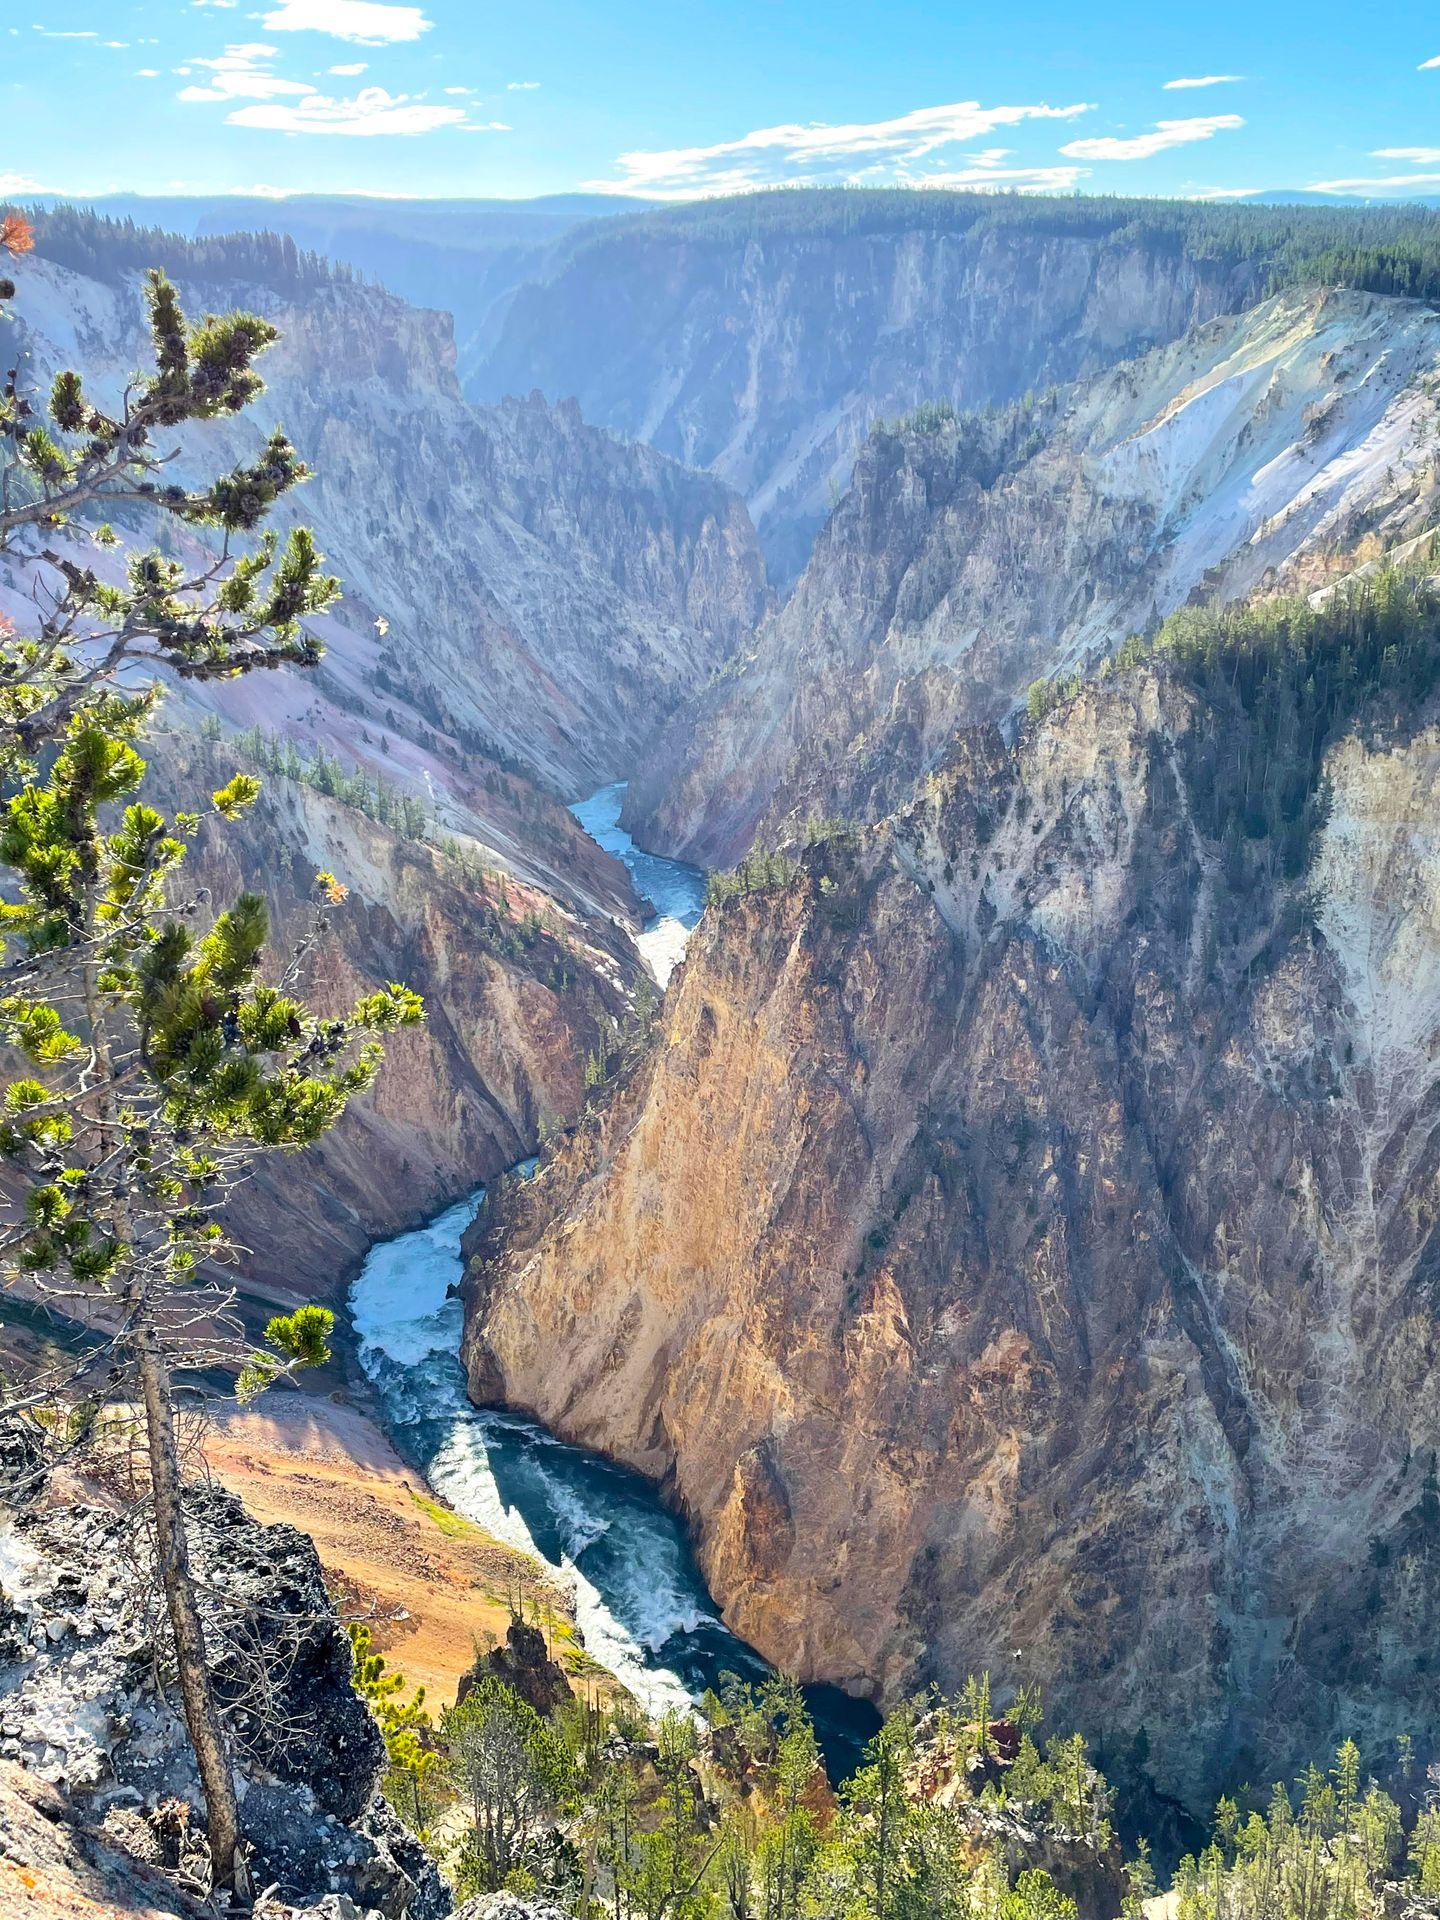 The view of the Grand Canyon of the Yellowstone from the Grand View Overlook.